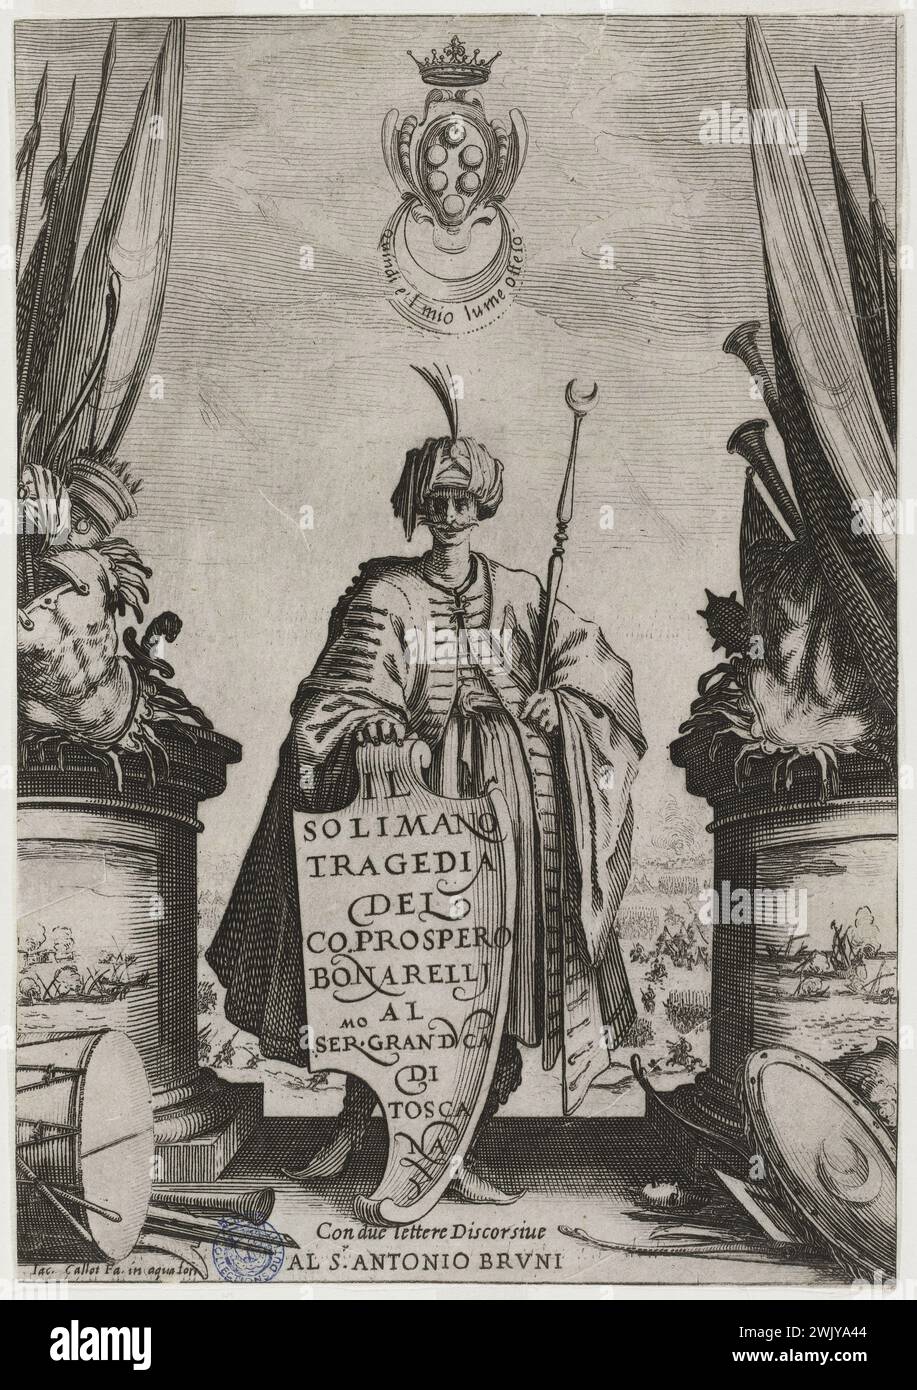 Jacques Callot (1592-1635). 'Soliman', Italian piece of Prosepero Bonarelli. Frontispiece with a portrait of Soliman. First issue of a suite of 6 pieces (Lieure 363, Meaume 434). Eat, 1619. Museum of Fine Arts of the City of Paris, Petit Palais. 99596-4 In the foot, man, illustration, ottoman, part of theater, portrait, sultan, tragedy, 17th 17th 17th 17th 17th 17th century, engraving Stock Photo